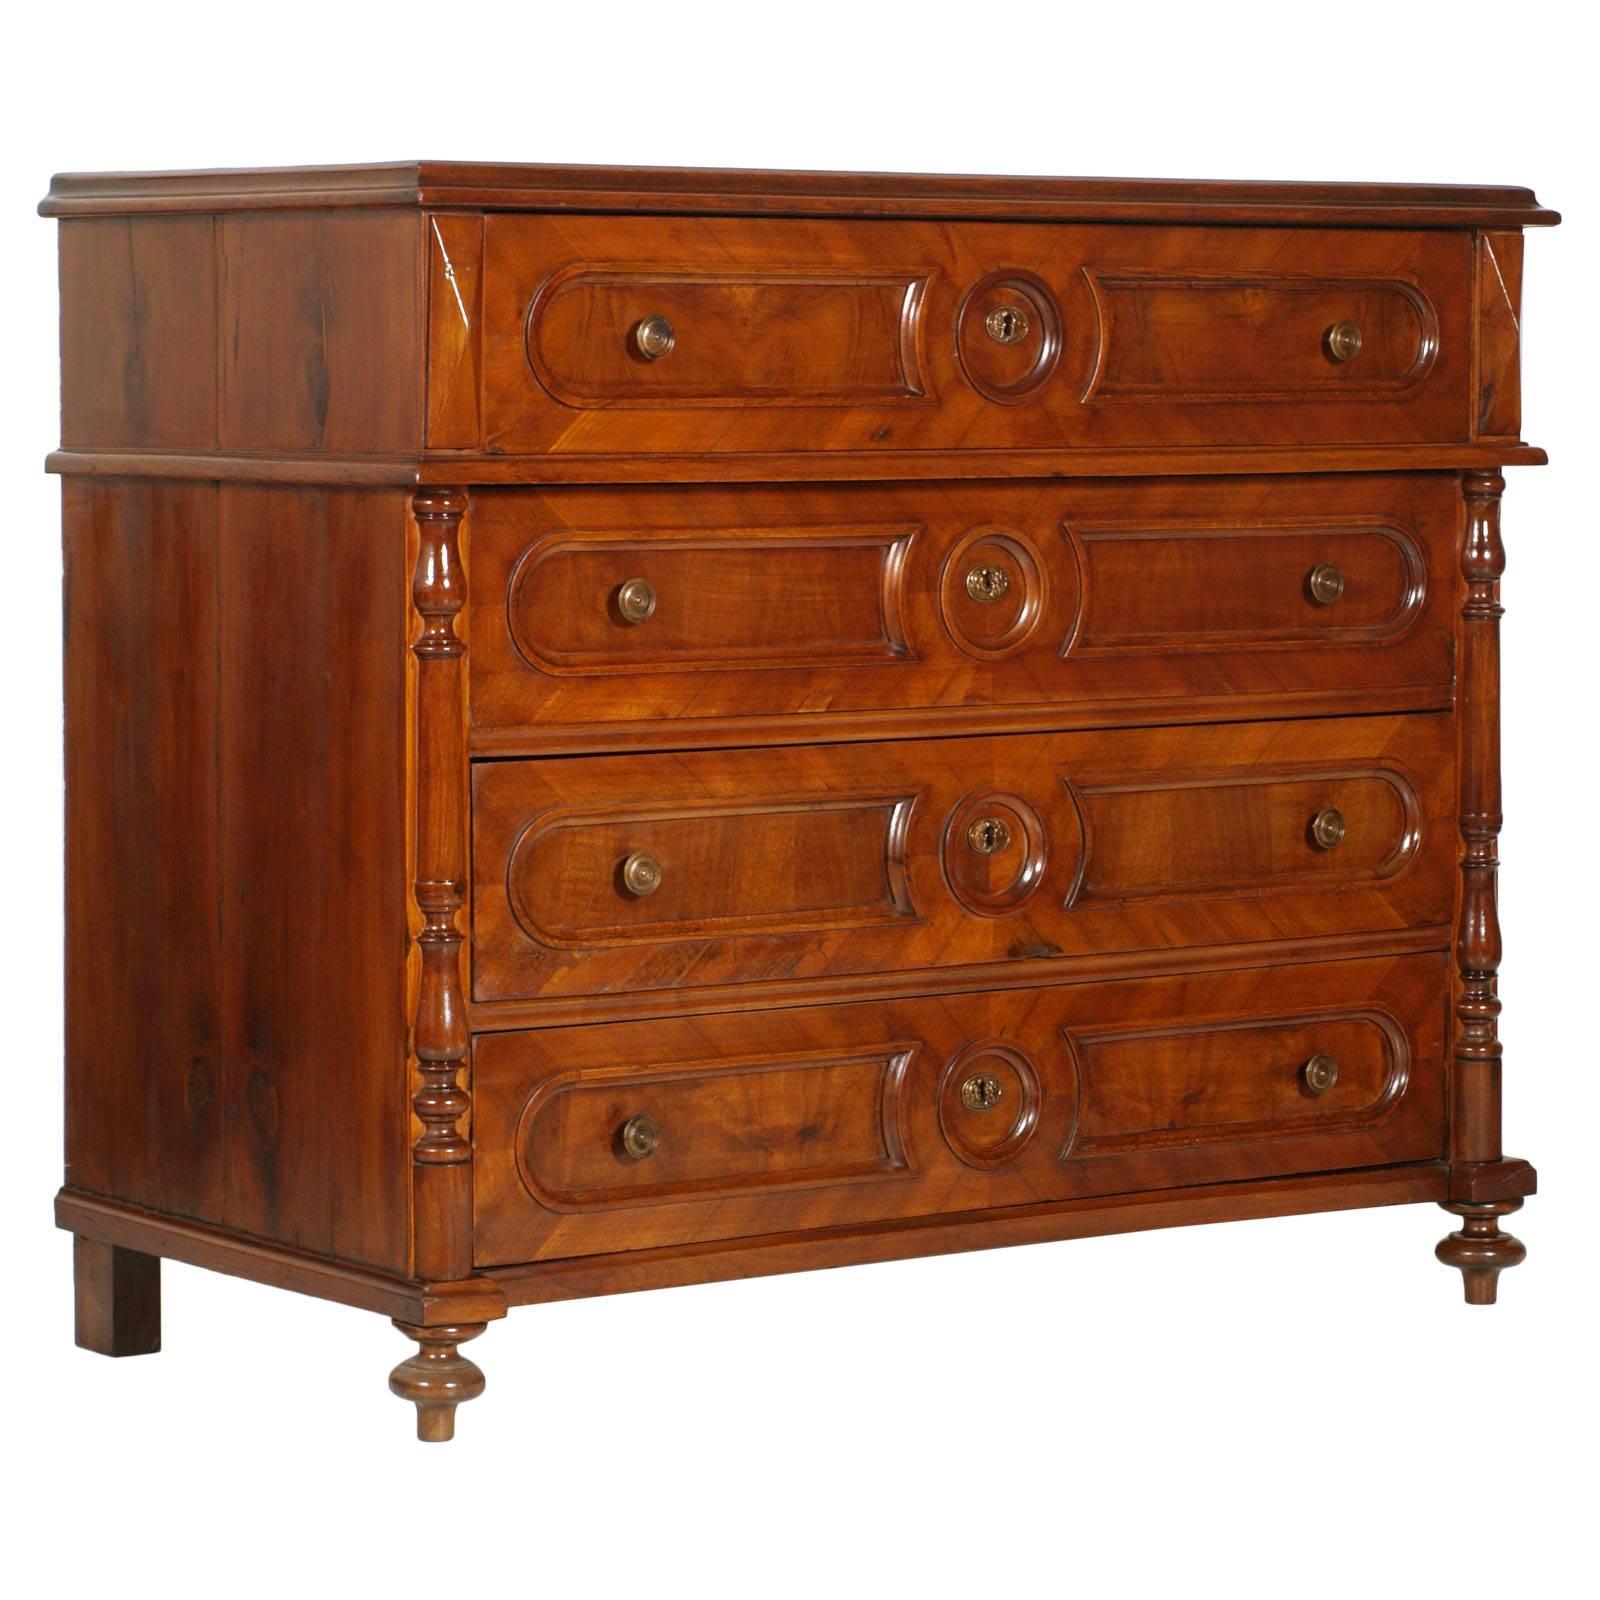 Italian elegant and important Lombard (from Lissone-Milan-)  commode, Mironi e Fossati attributable from the Mid nineteenth century, in blond walnut and walnut veneer. Wax polished. Perfect conditions.

Measure cm: H 110 W 136 D 66.
   